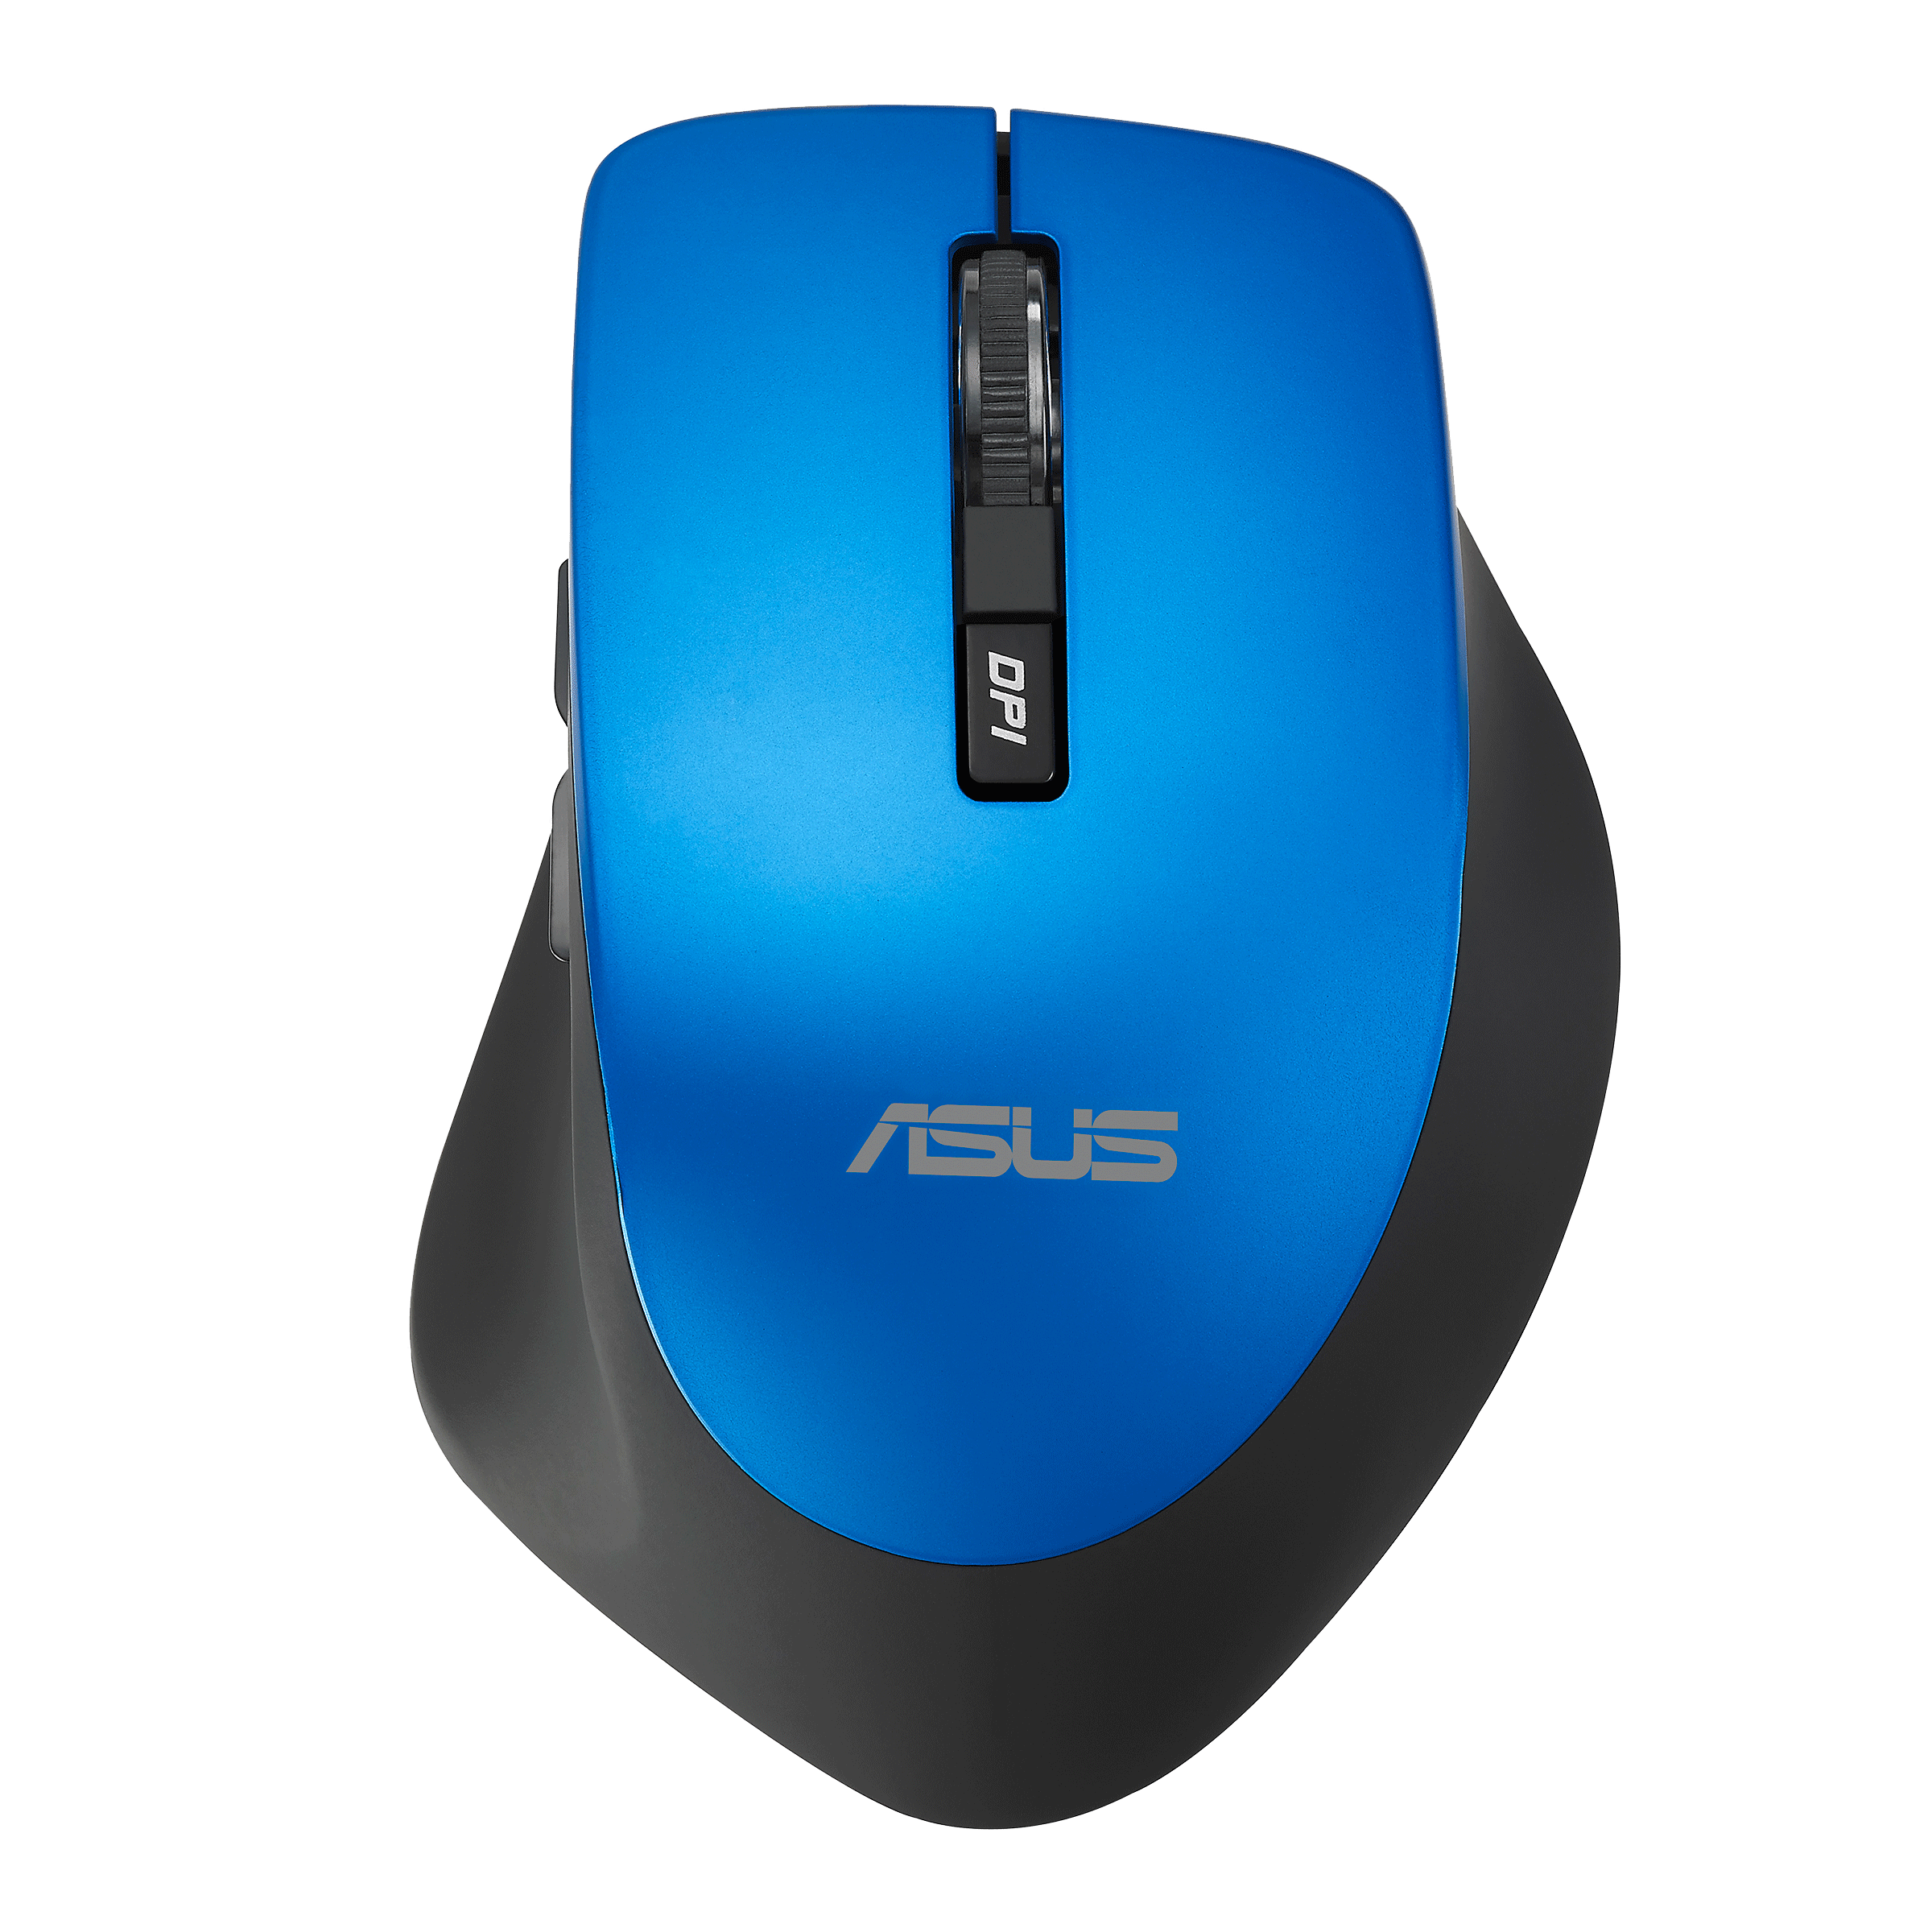 WT425｜Mice and Mouse Pads｜ASUS Global